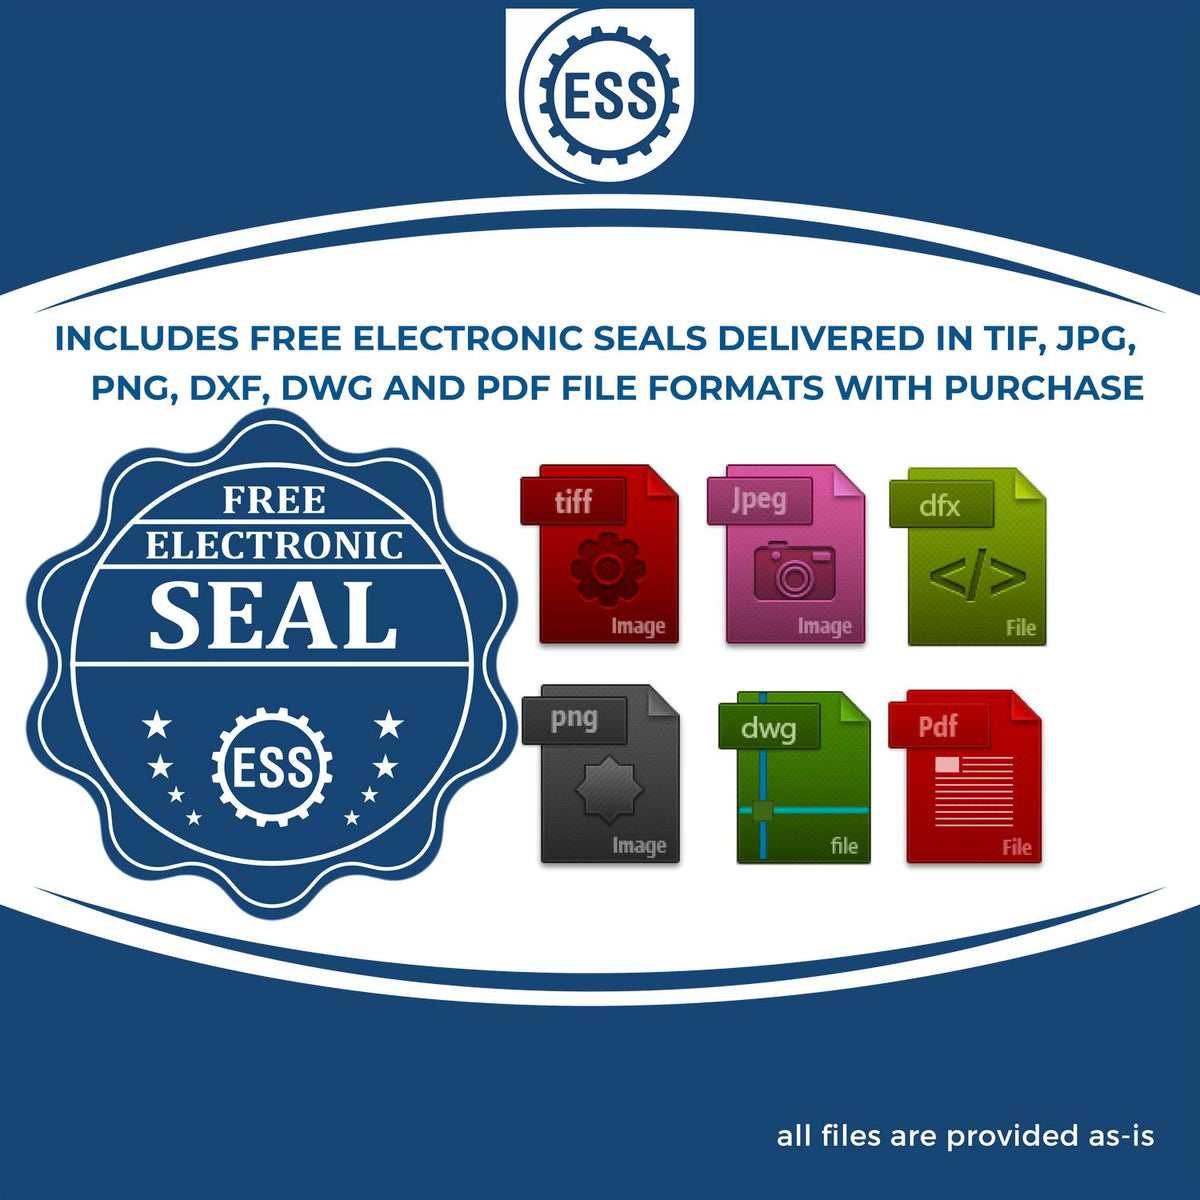 An infographic for the free electronic seal for the Premium MaxLight Pre-Inked Montana Landscape Architectural Stamp illustrating the different file type icons such as DXF, DWG, TIF, JPG and PNG.